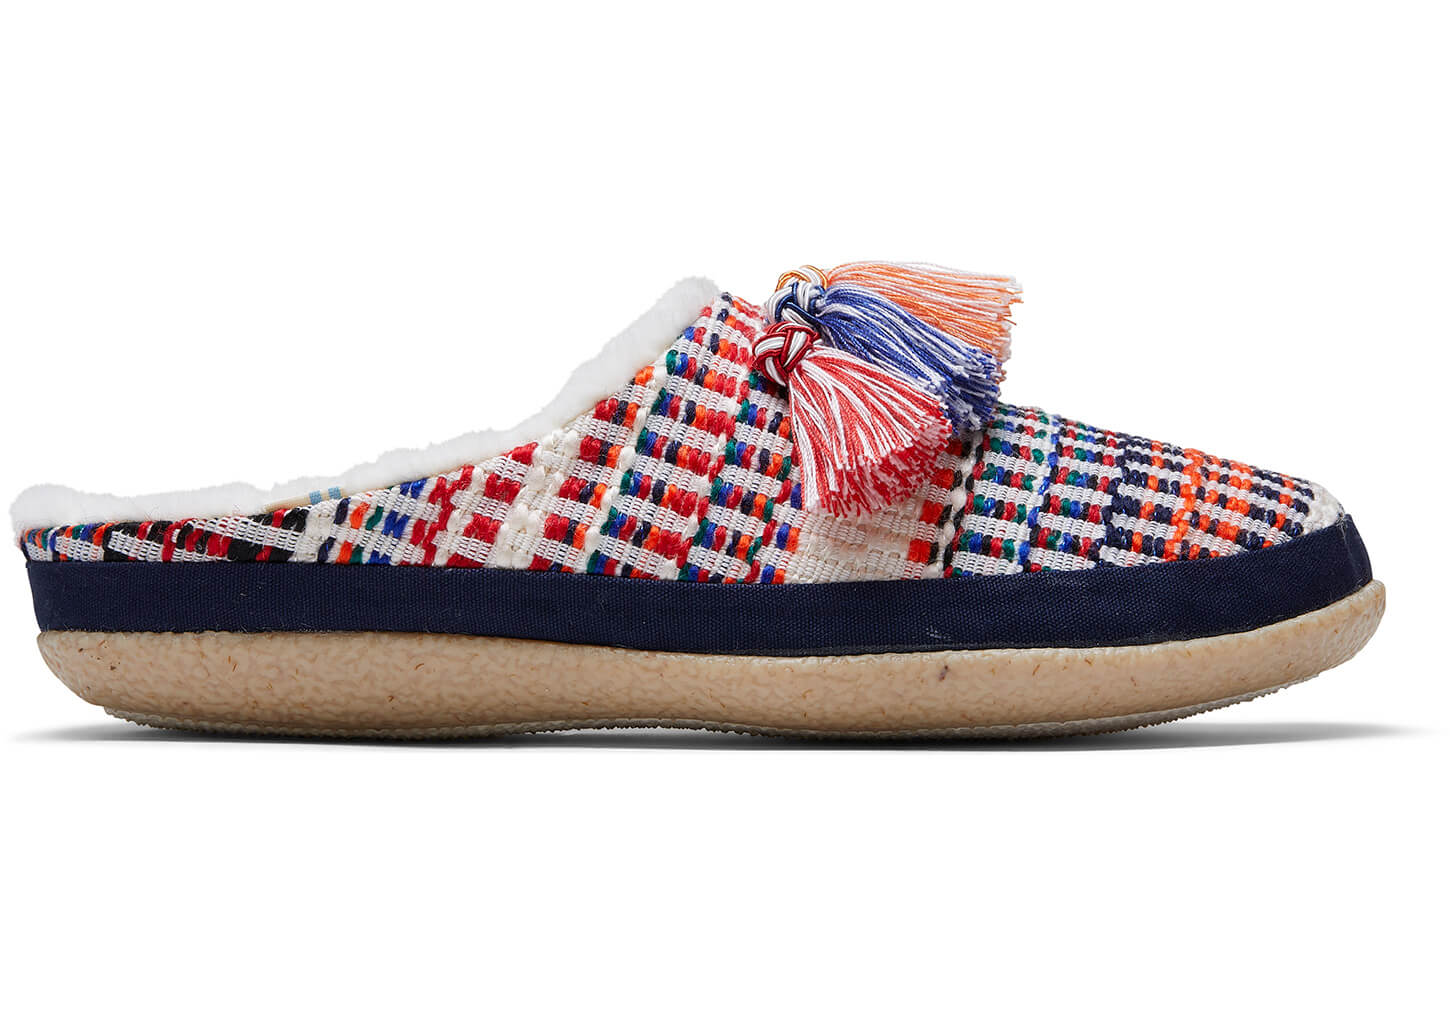 toms shoes with tassels